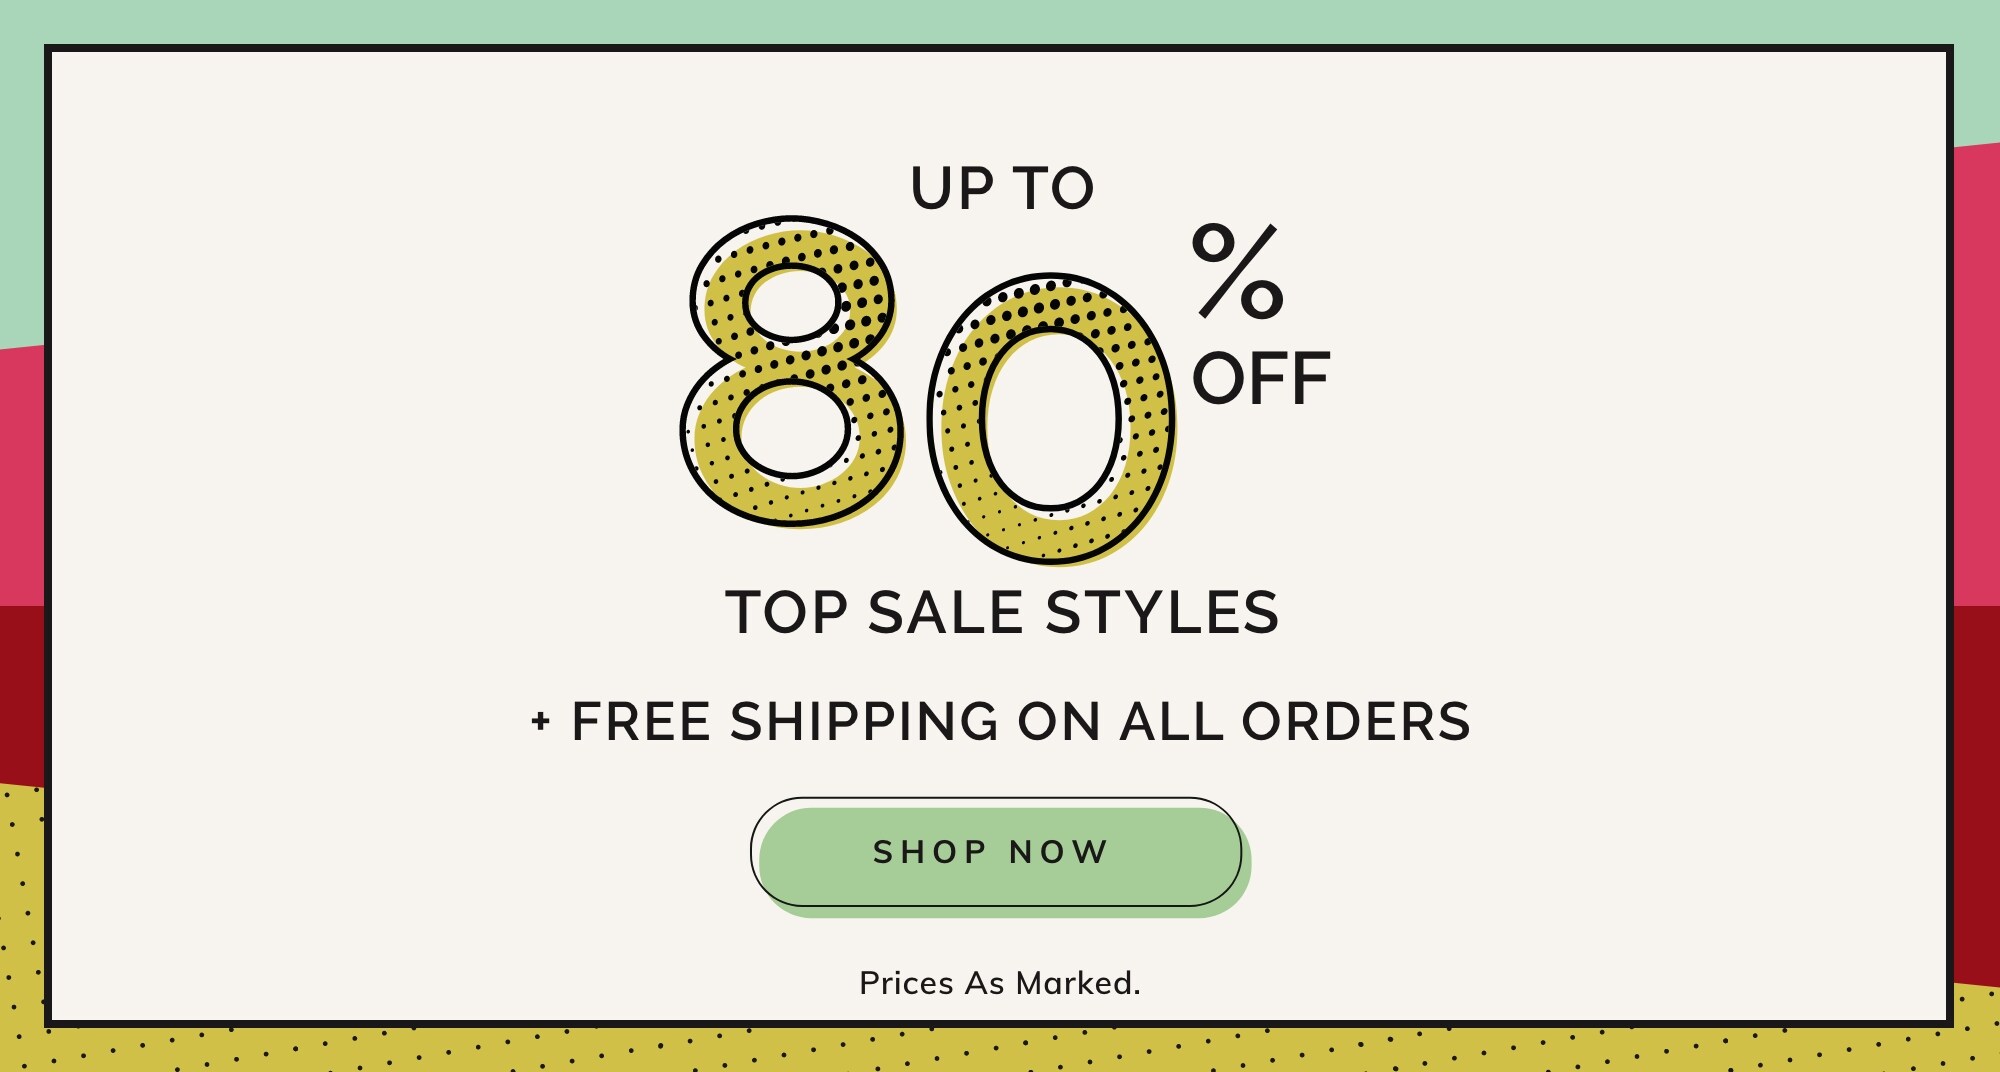 UP TO 80% OFF* TOP SALE STYLES + FREE SHIPPING ON ALL ORDERS